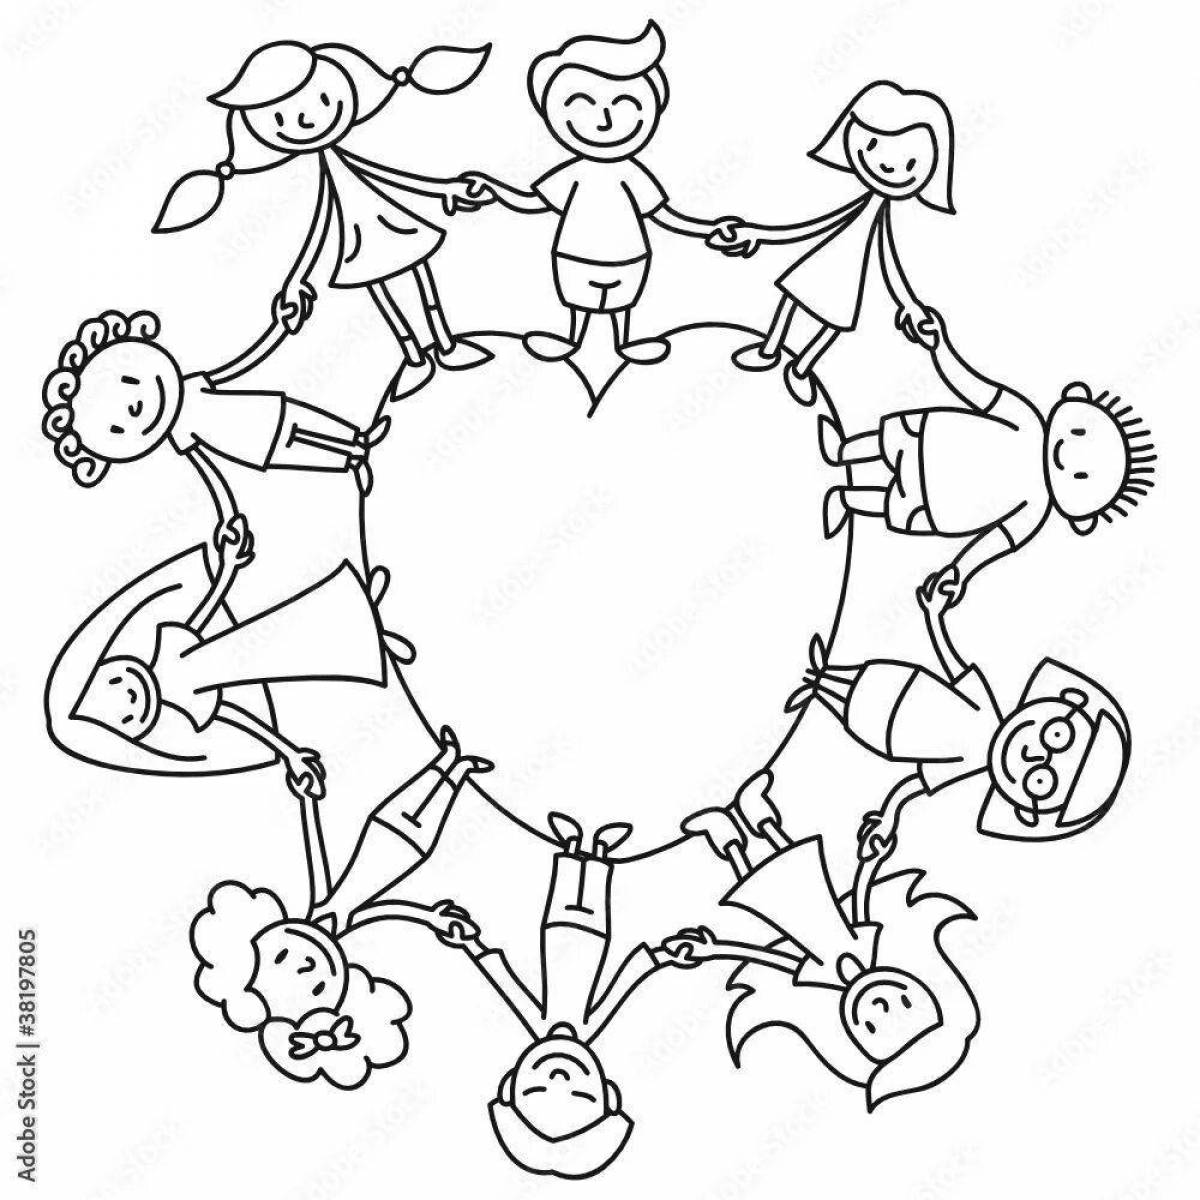 Coloring page with dynamic circle